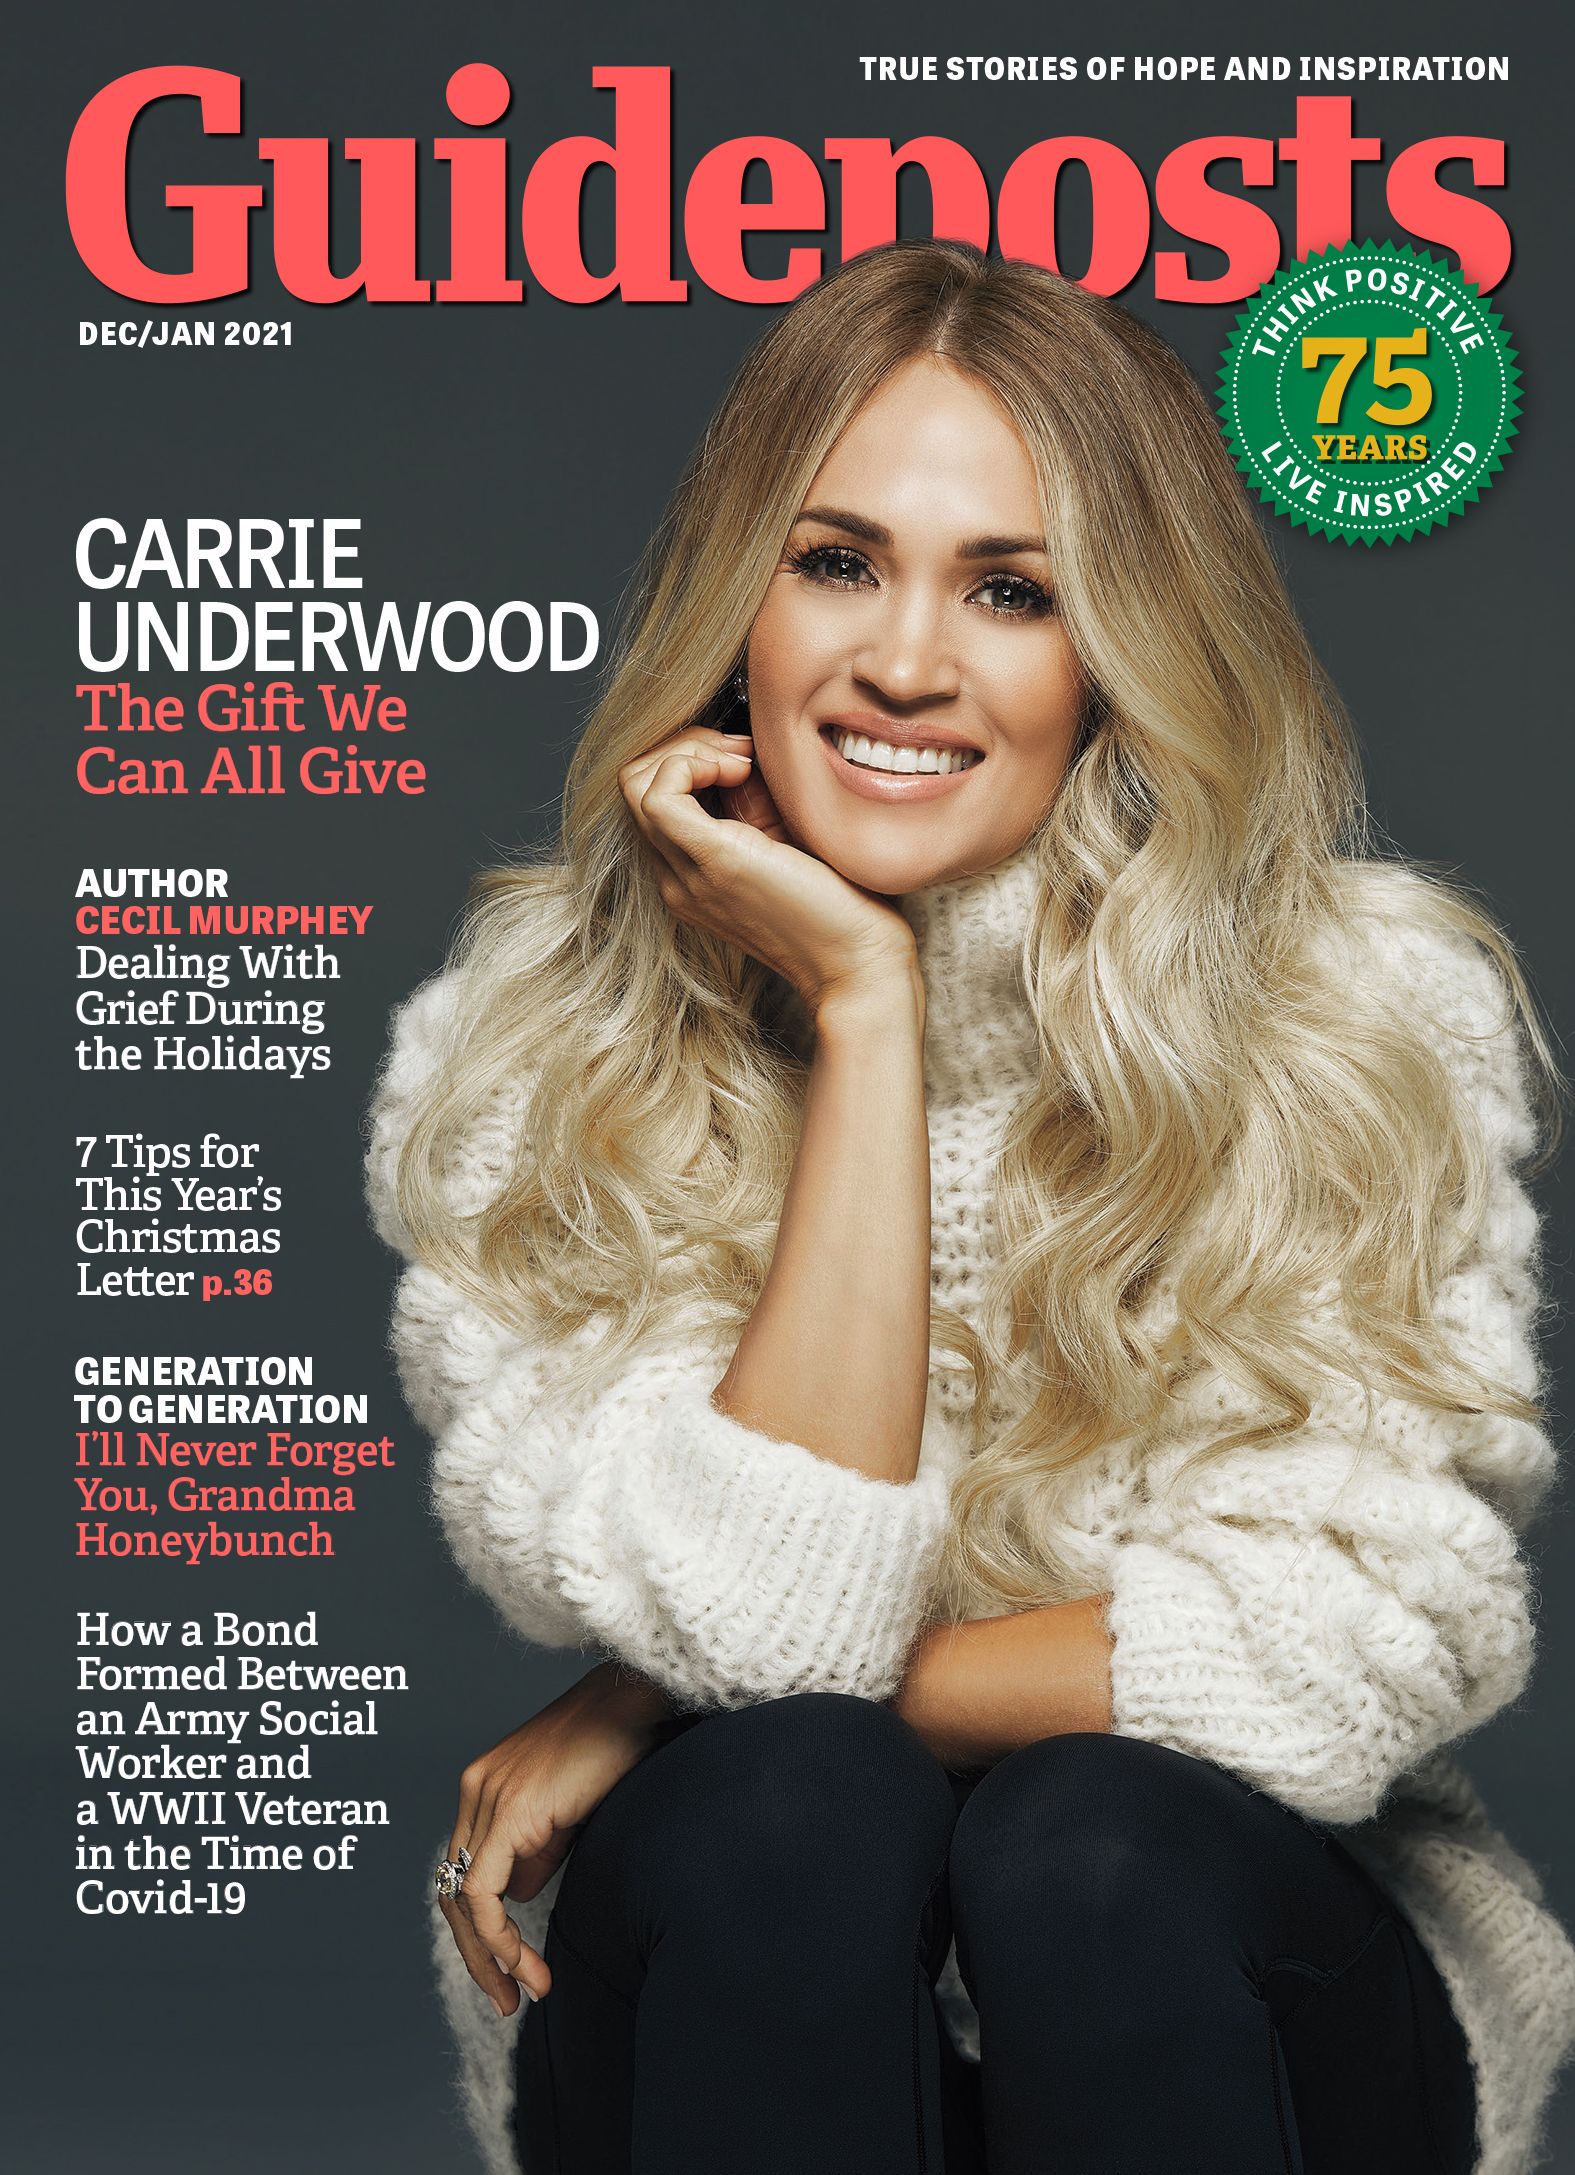 Carrie Underwood on the cover of Guideposts magazine (Guideposts)